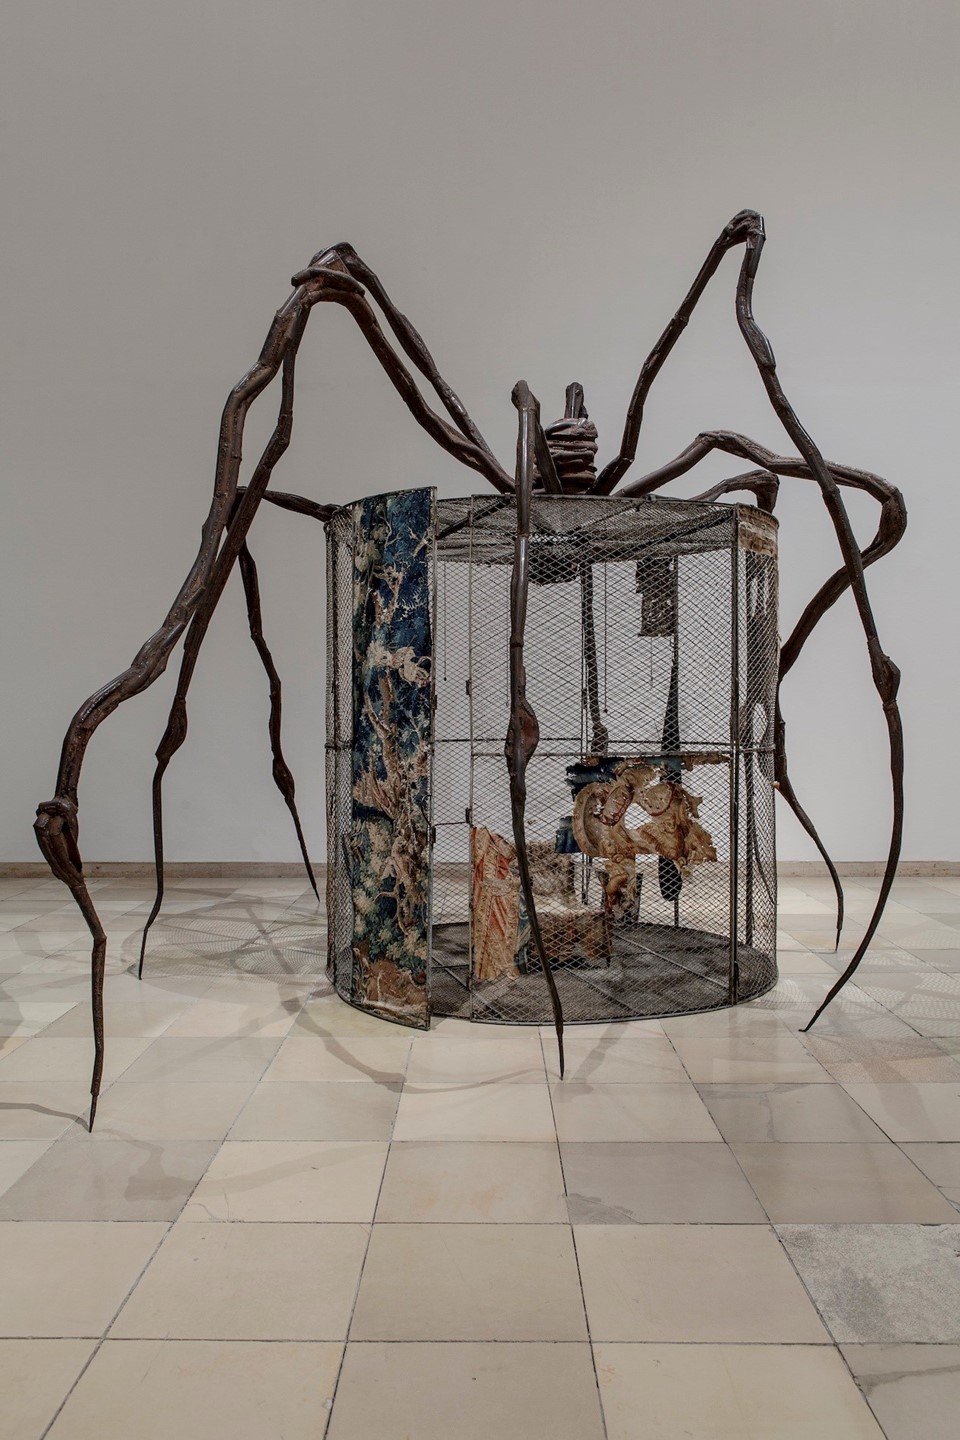 Needle and dread: Louise Bourgeois's disturbing textile works, Louise  Bourgeois